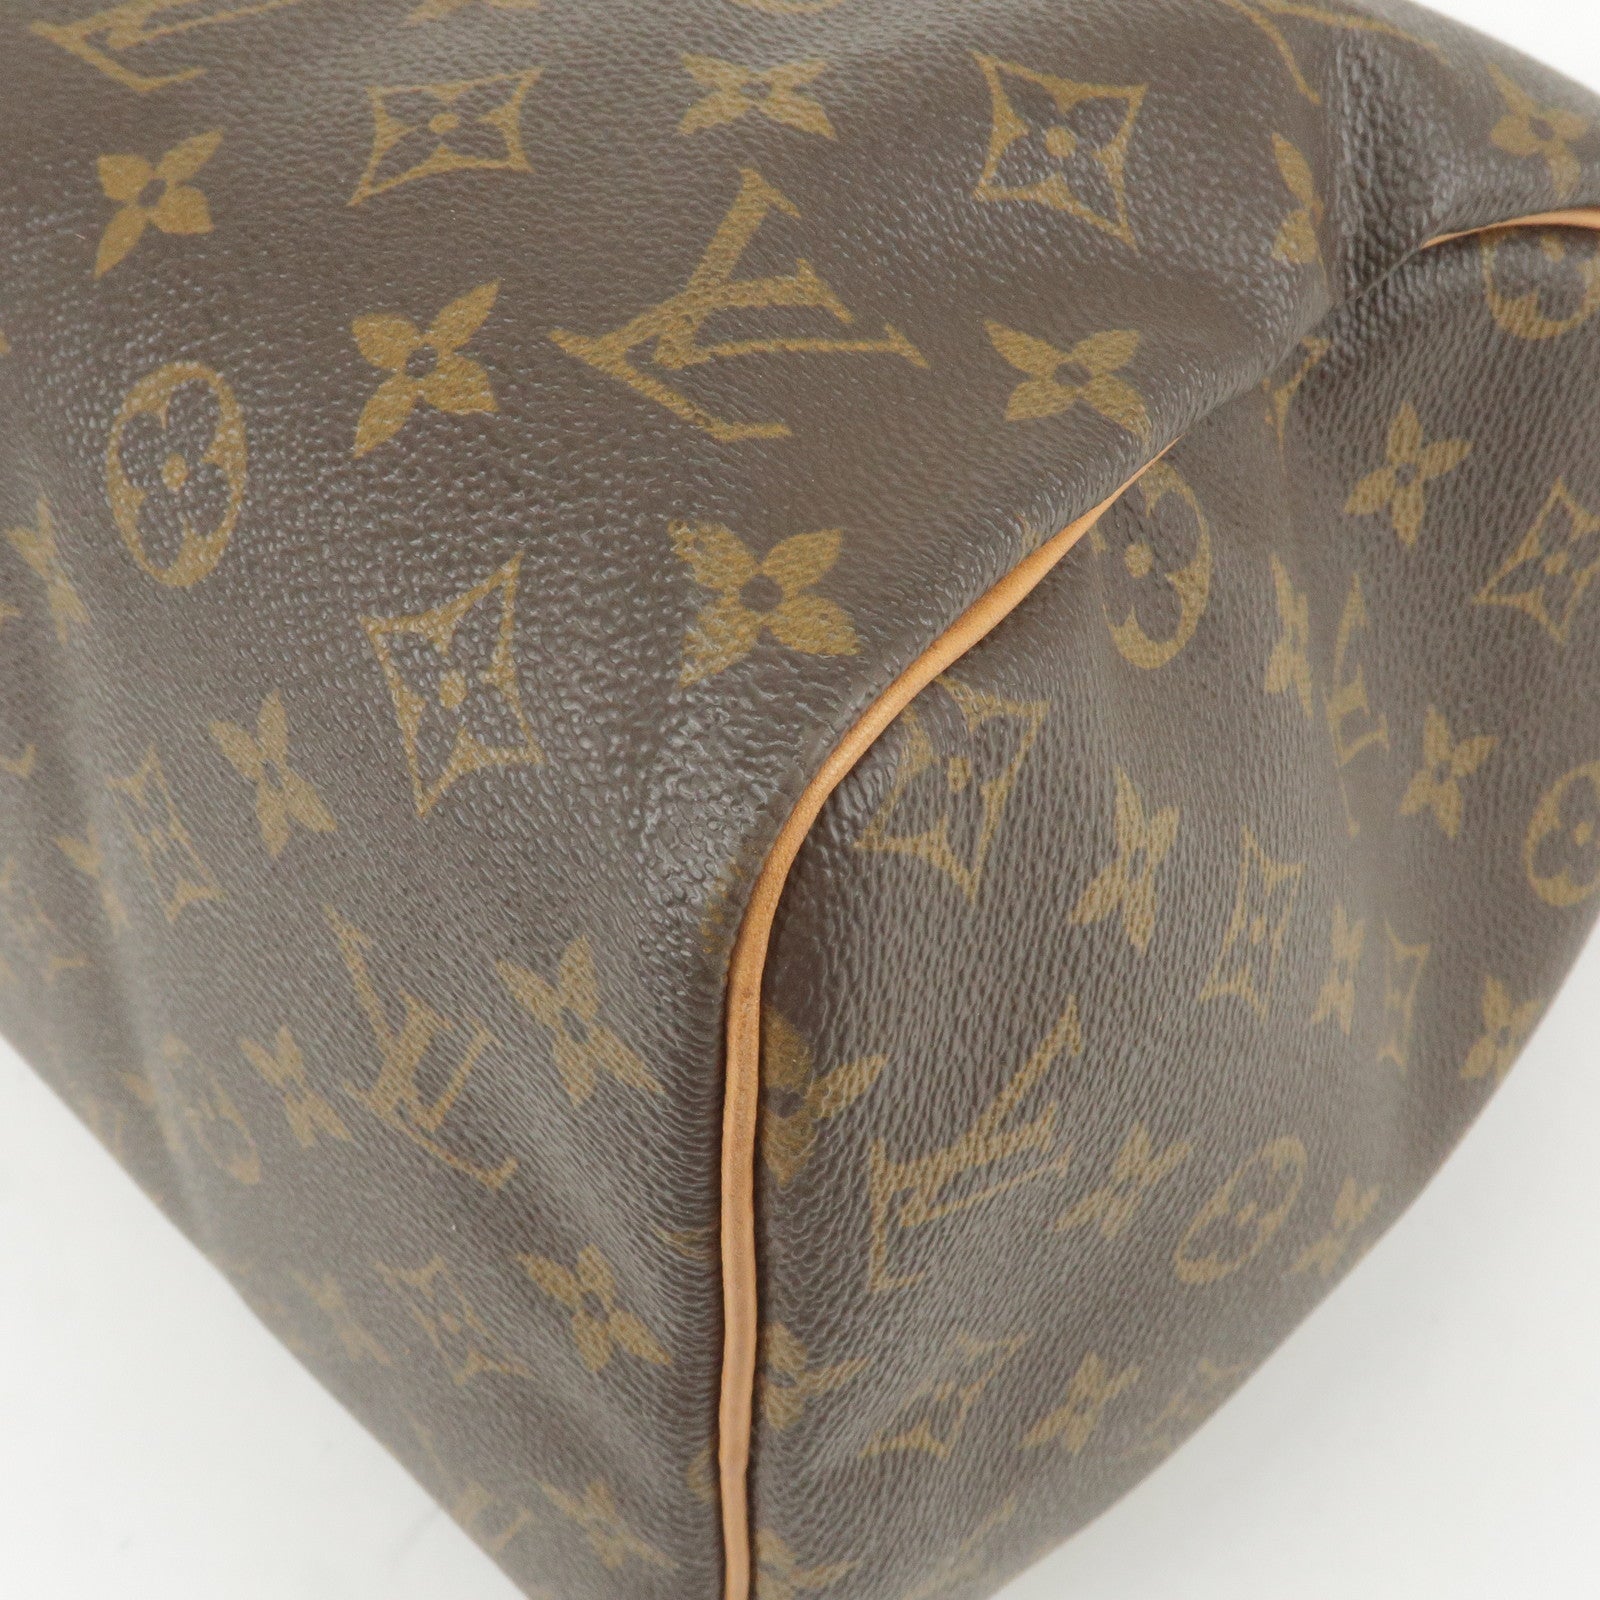 2 - ep_vintage luxury Store - Marly - Louis Vuitton Coussin PM